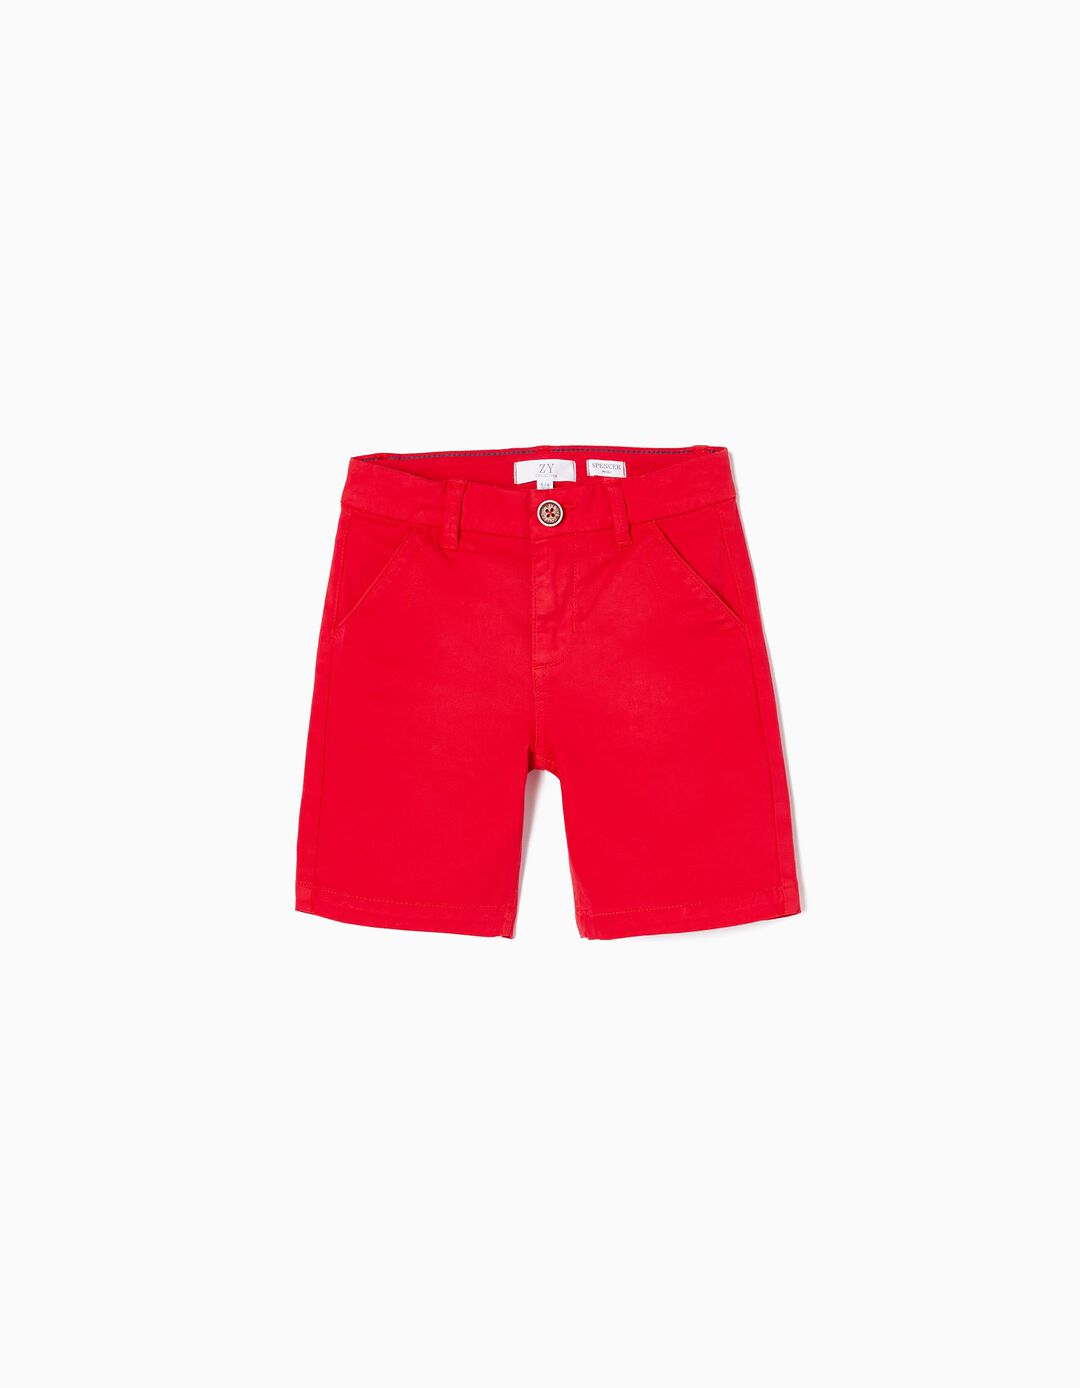 Cotton Twill Shorts for Boys 'Midi', Red